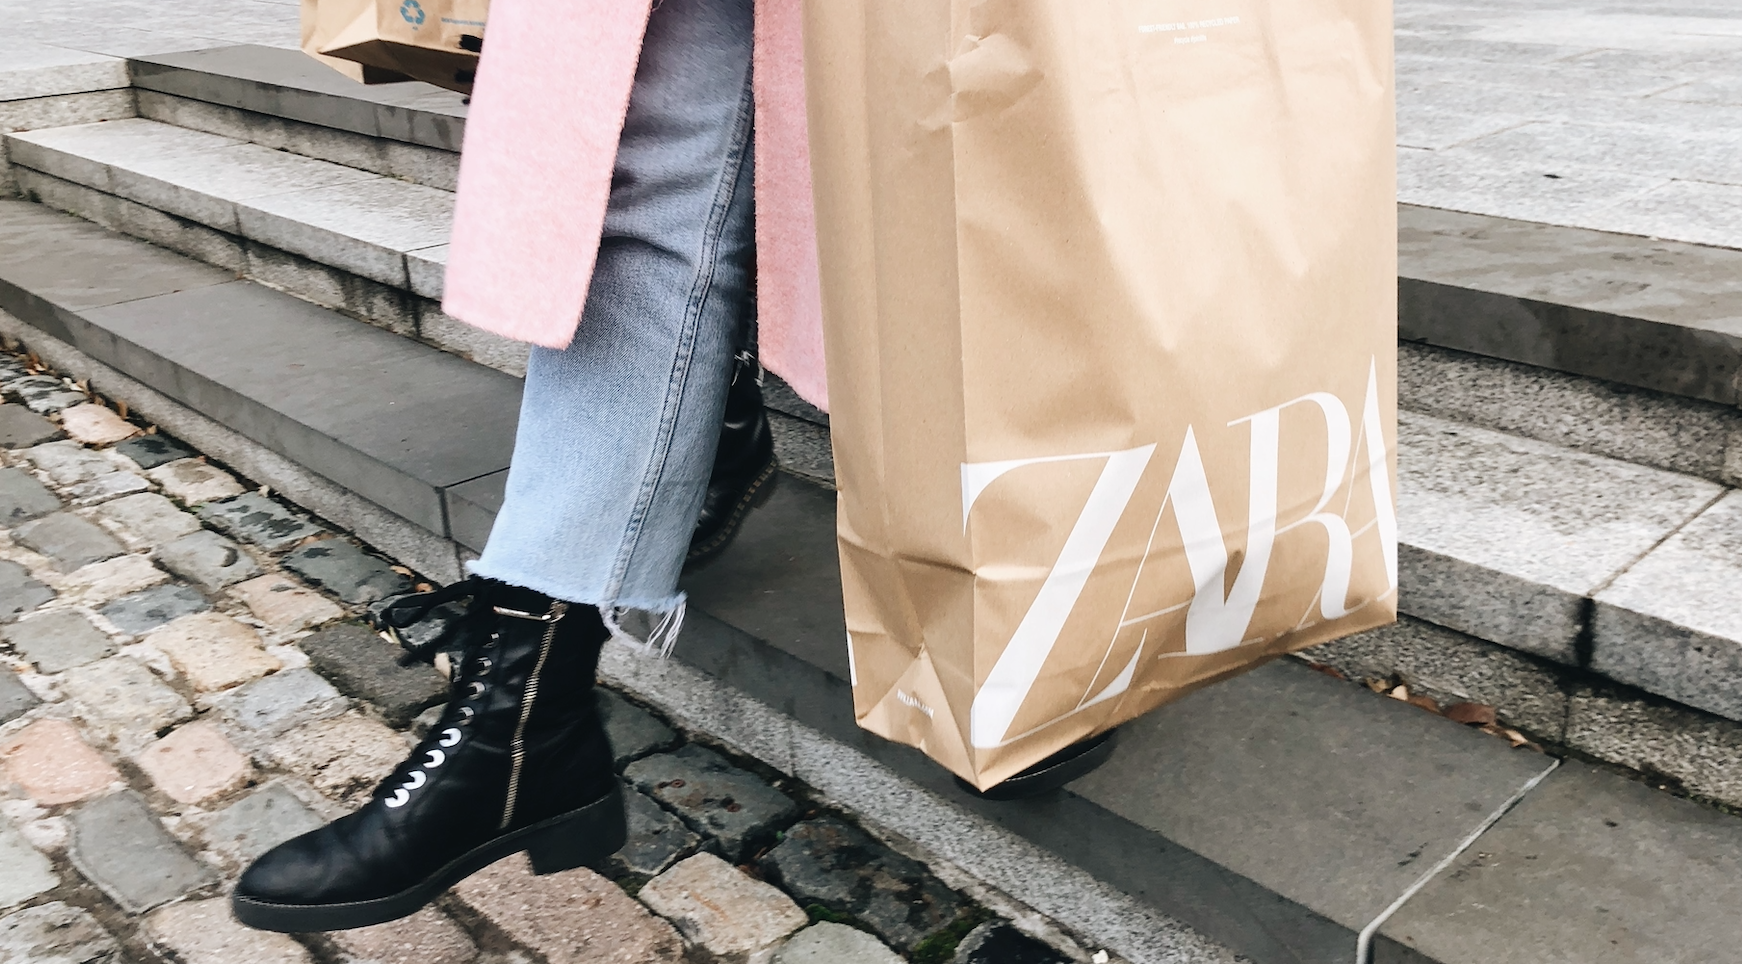 Treat yourself! The stunning Zara shoes that deserve a place on your Christmas wishlist